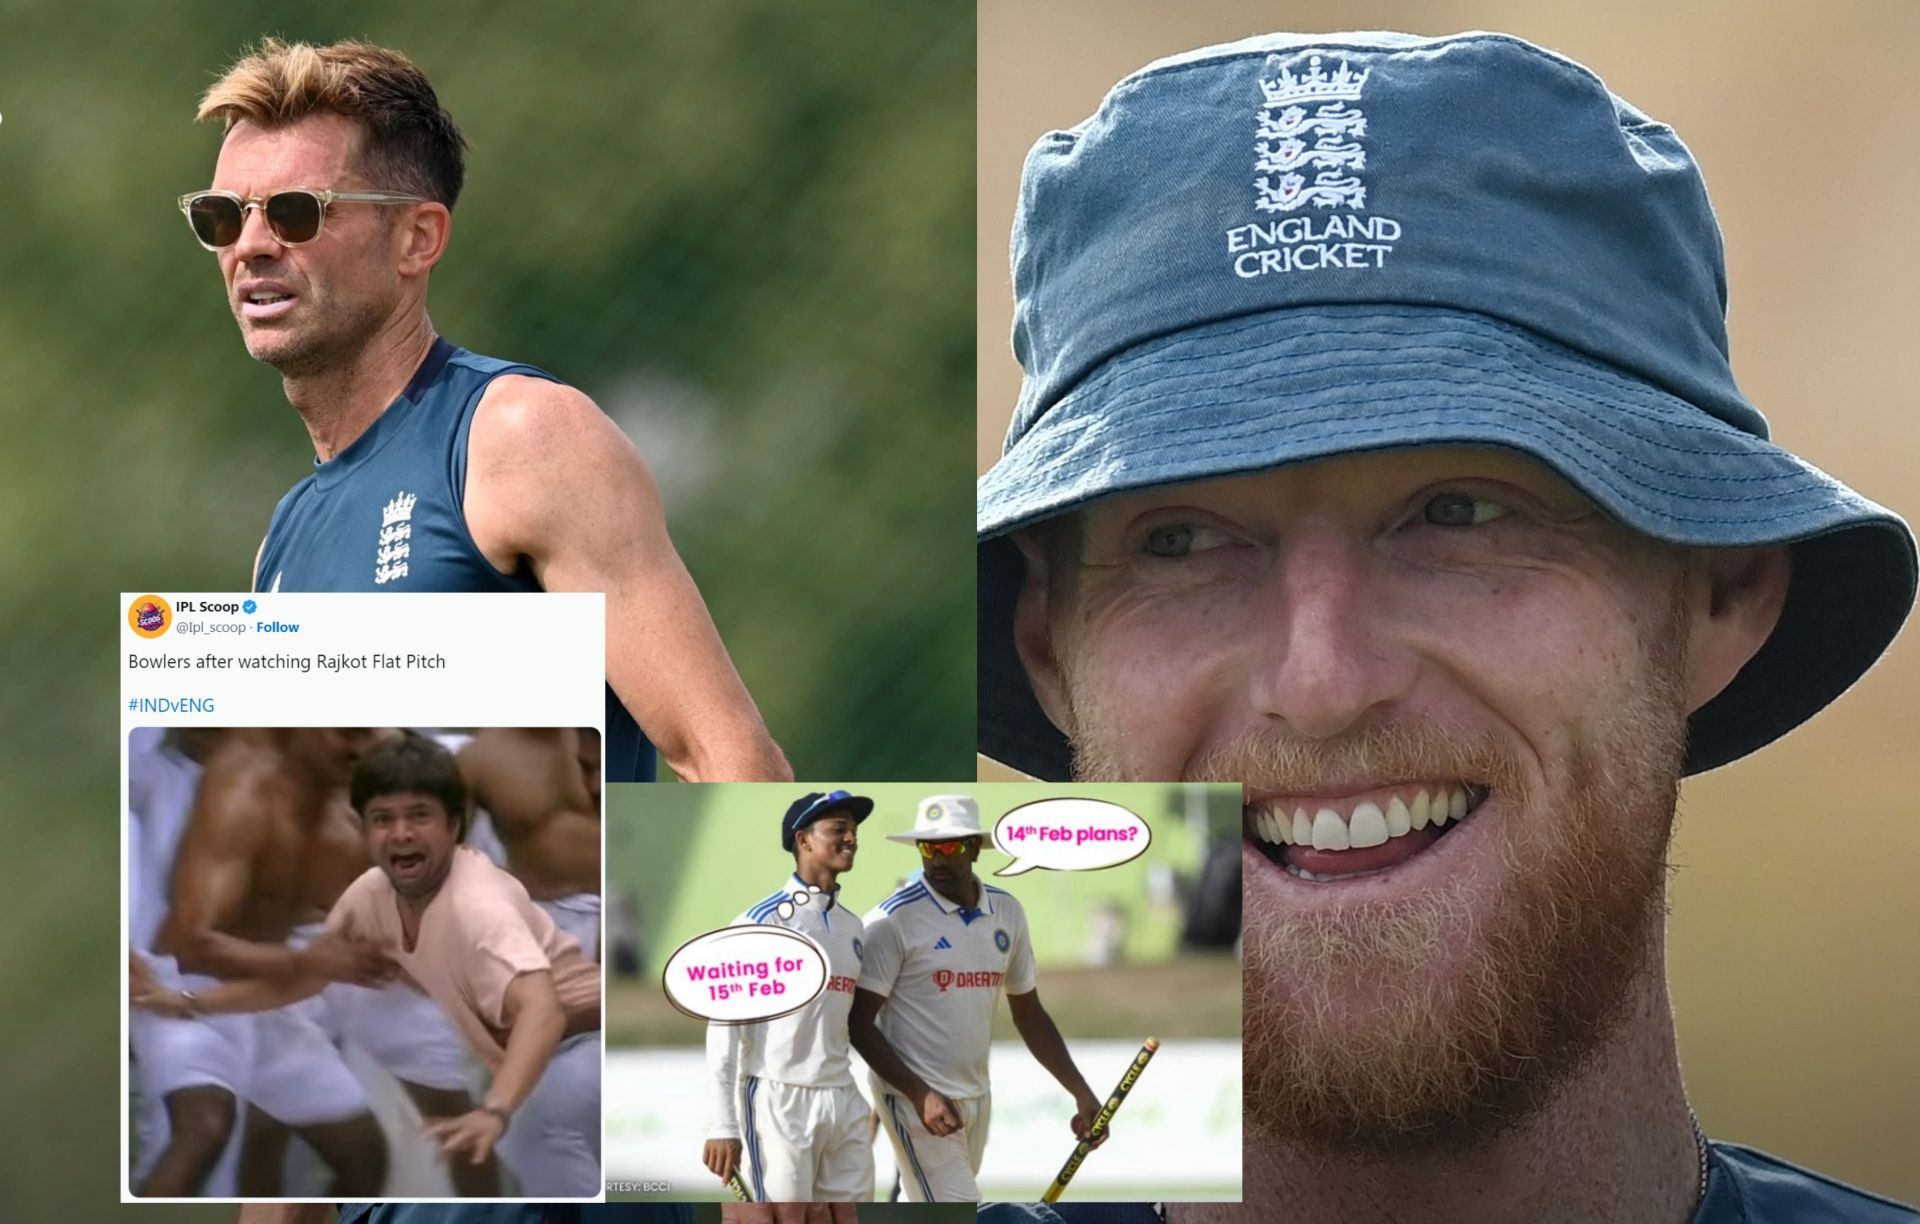 Fans react ahead of 3rd Test between India and England.